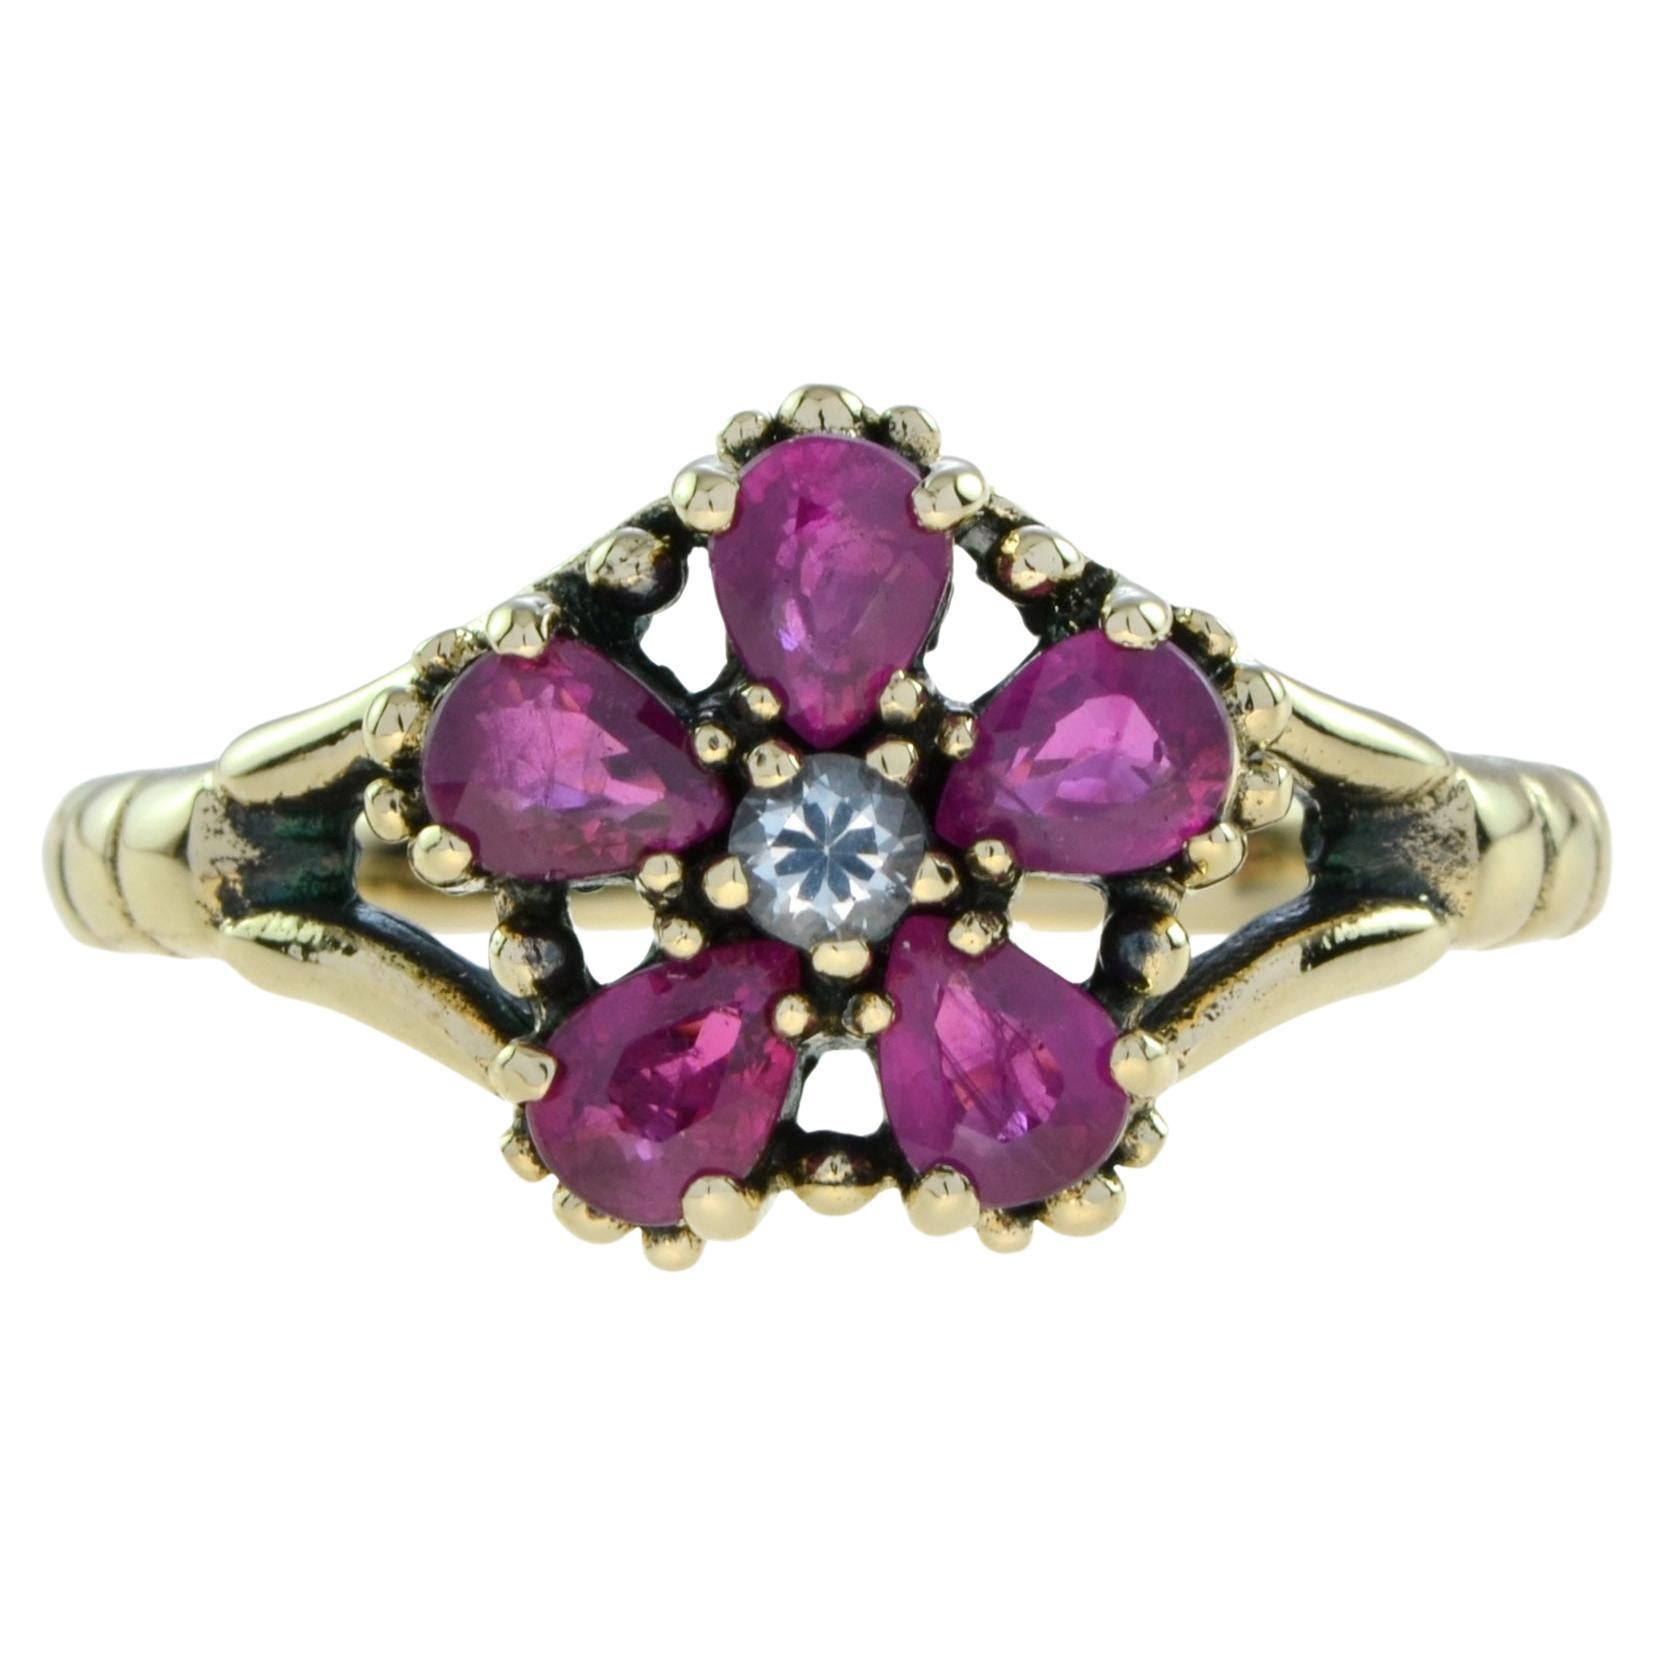 White Sapphire and Ruby Vintage Style Floral Cluster Ring in 9K Yellow Gold